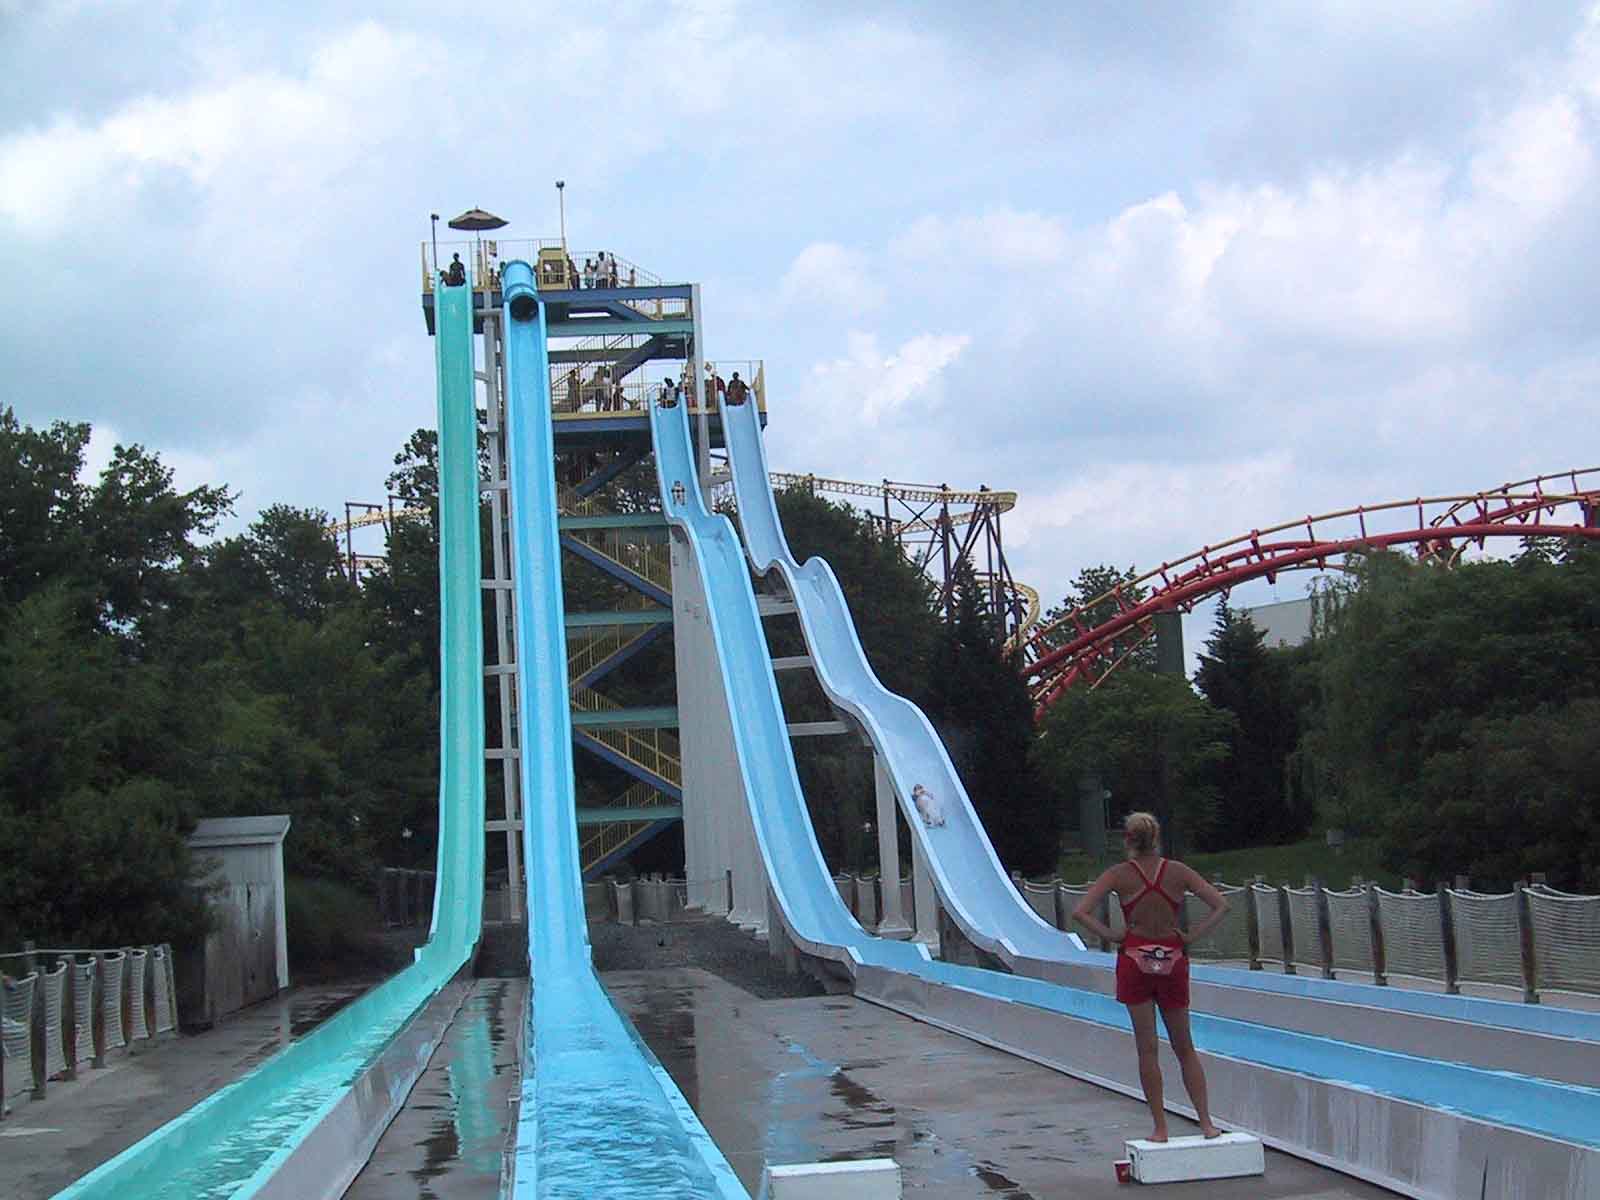      Fateback Com Kings Dominion Water Park Waterworks Pictures Html